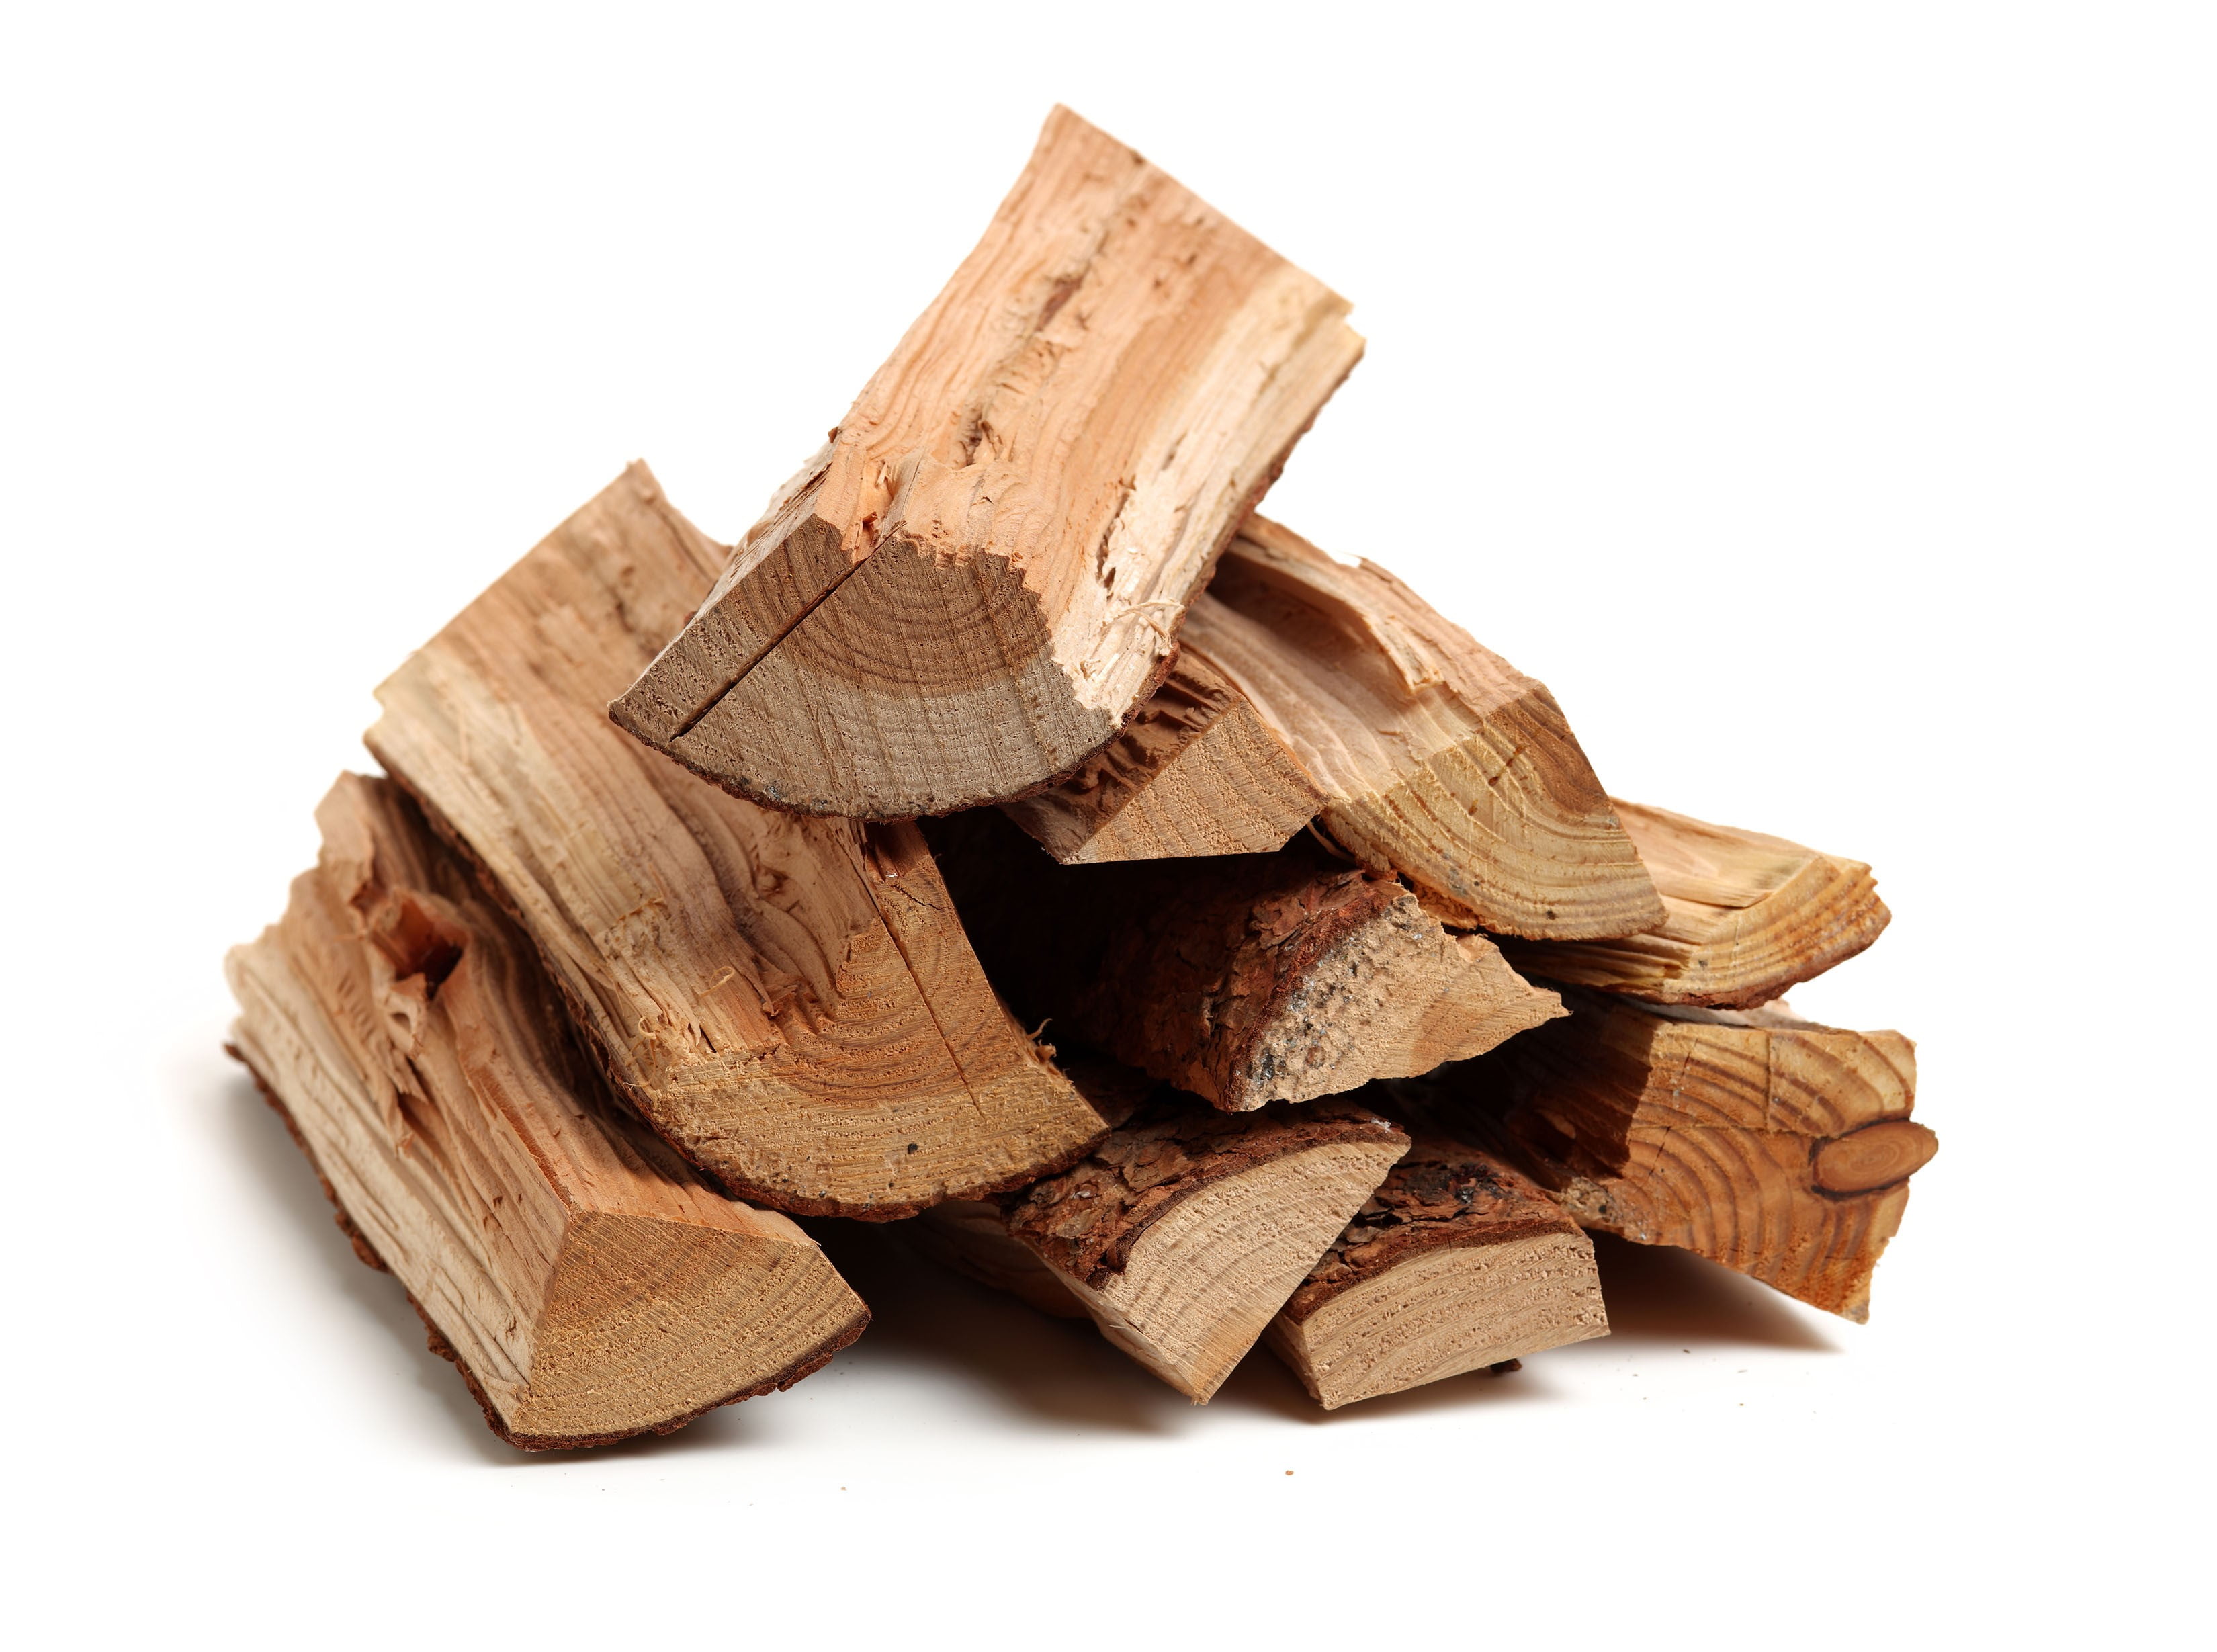 Hickory Wood Mini Smoking Logs for Expert Grills